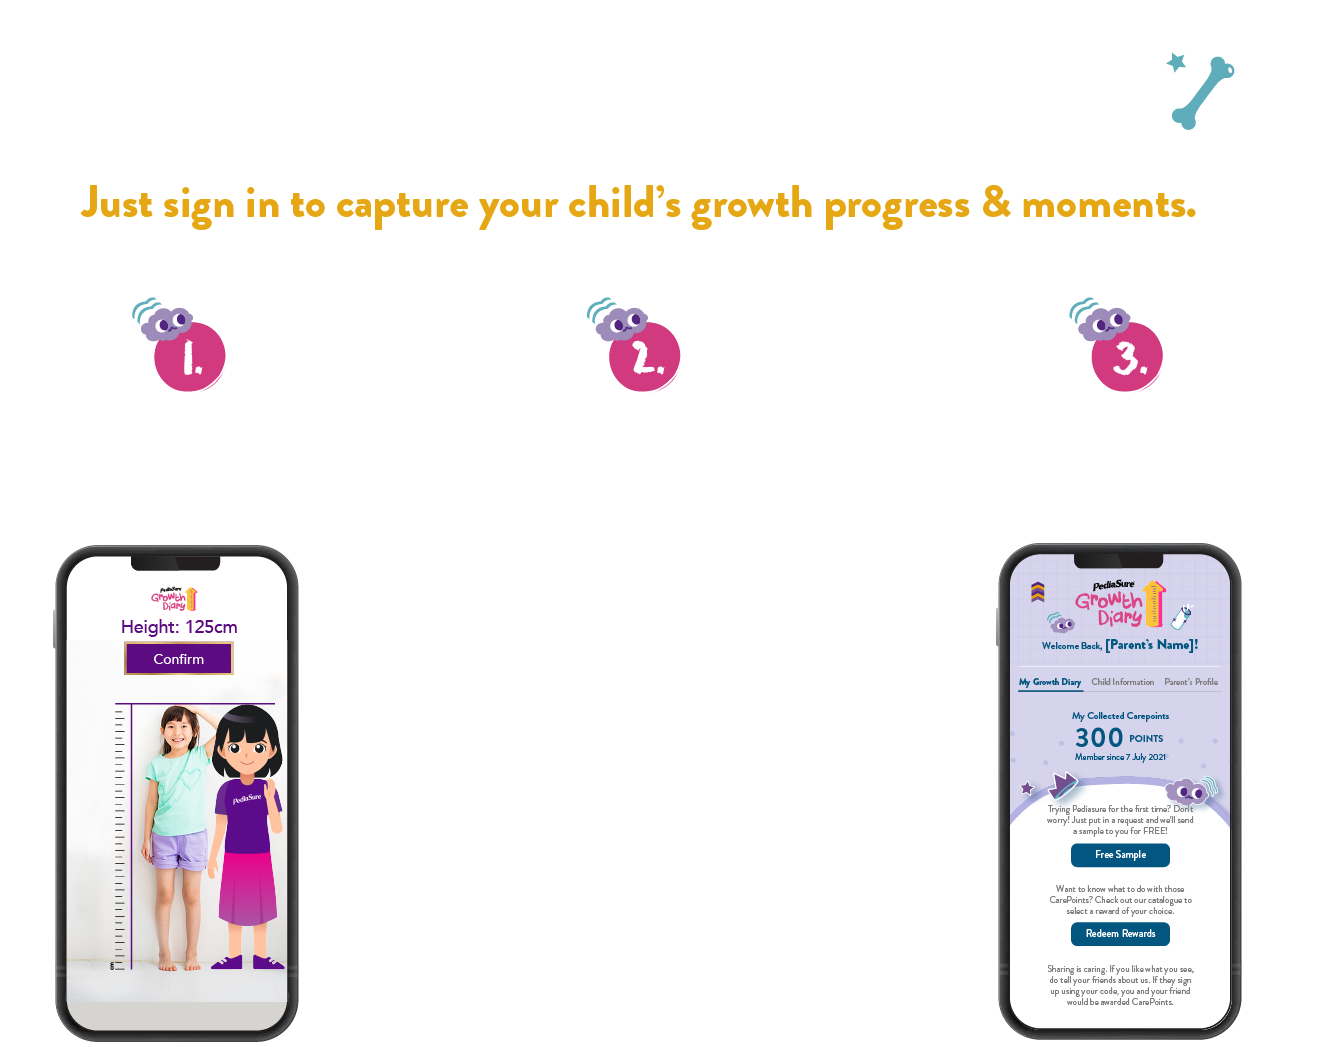 Unlock more features for free! Just sign in! Just sign in to capture your child's growth progress & moments. 1. Keep track of your child's growth over time. 2. Personalized height growth chart. Psst: All measurement data is saved. You can add as many kids as you like. 3. See your accumulated CarePoint & redeem rewards.